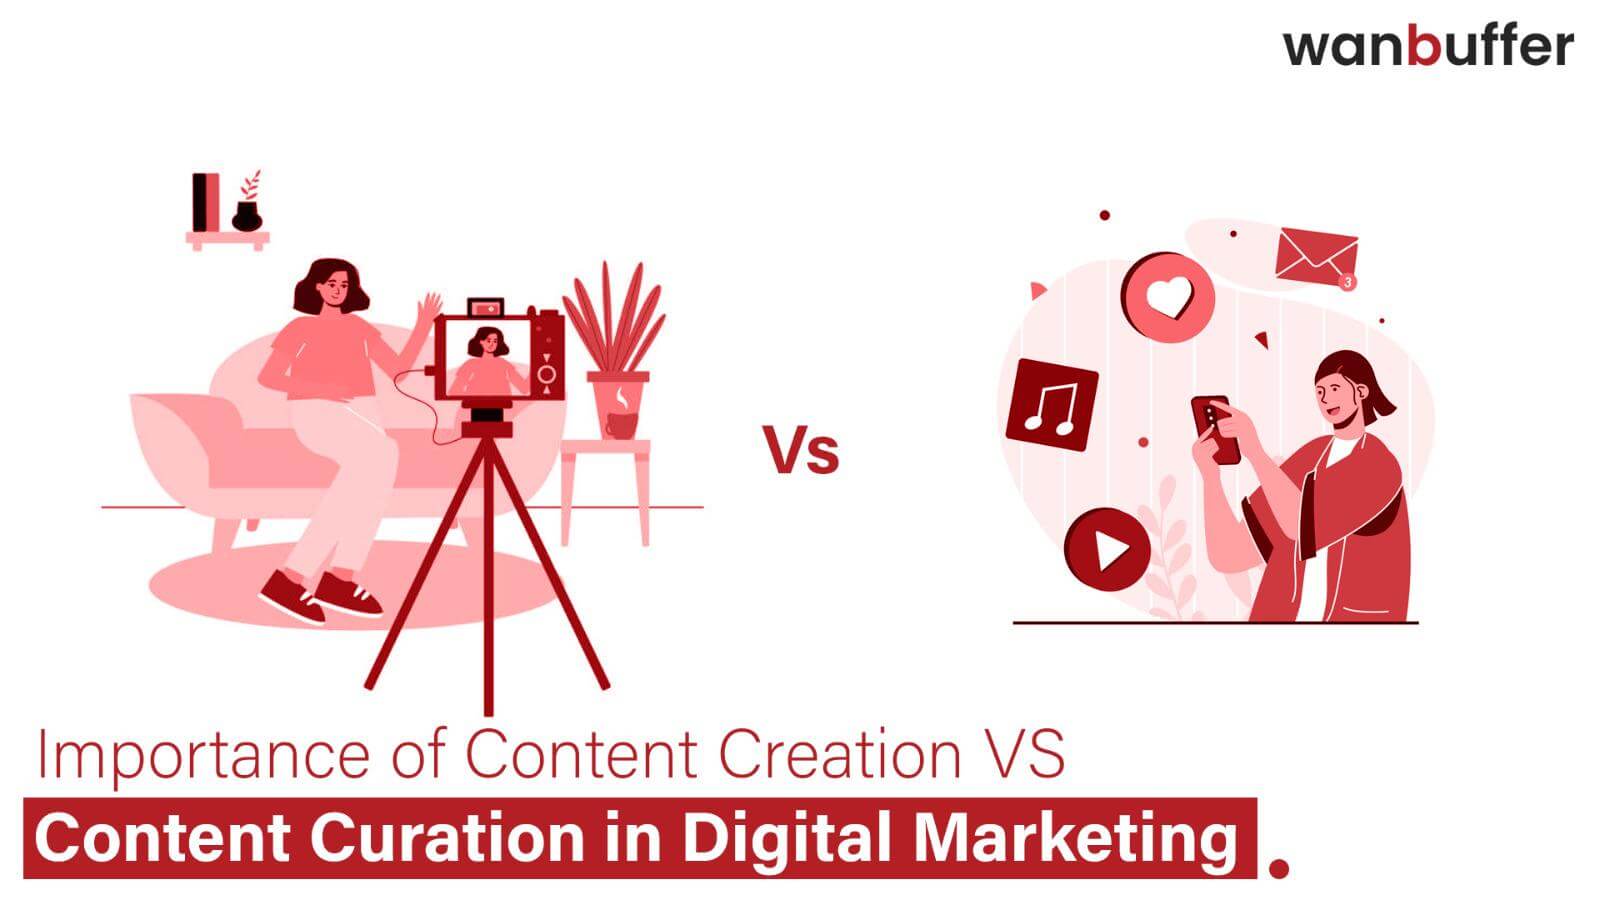  The value of creating content versus curating content in digital marketing